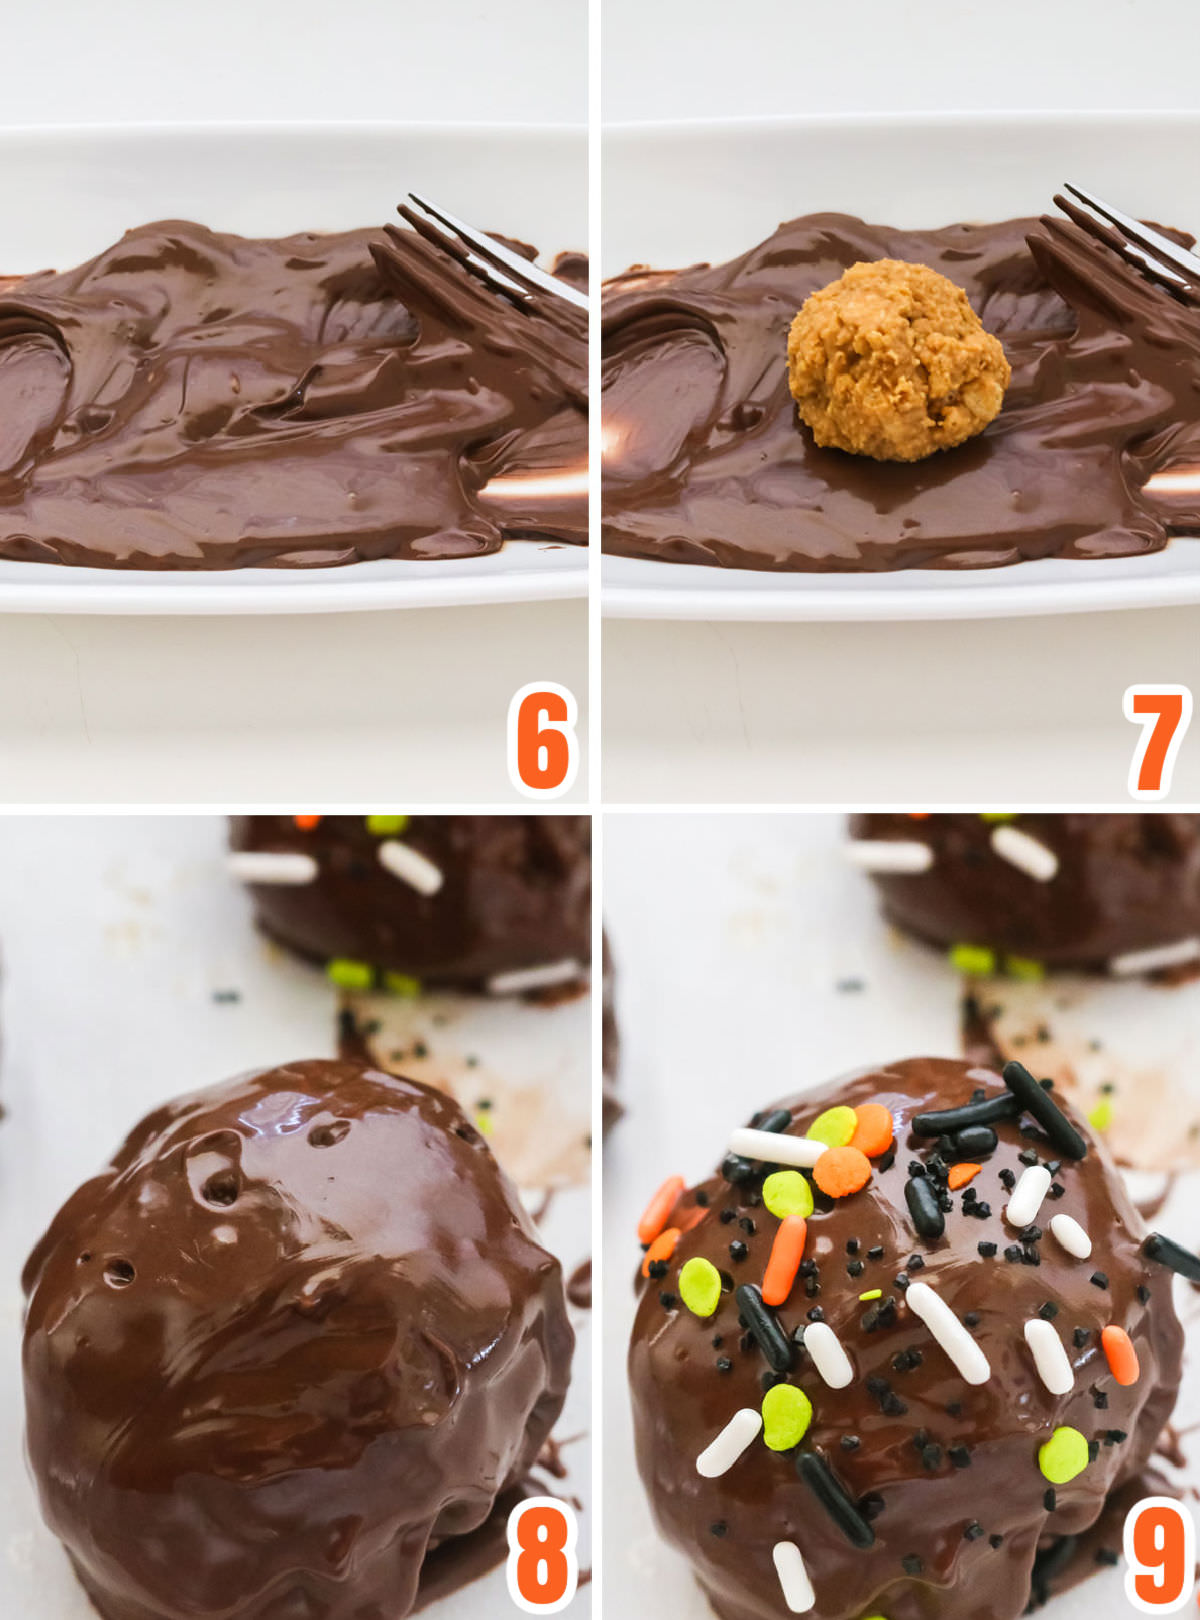 Collage image showing the steps for covering the Peanut Butter balls in chocolate.